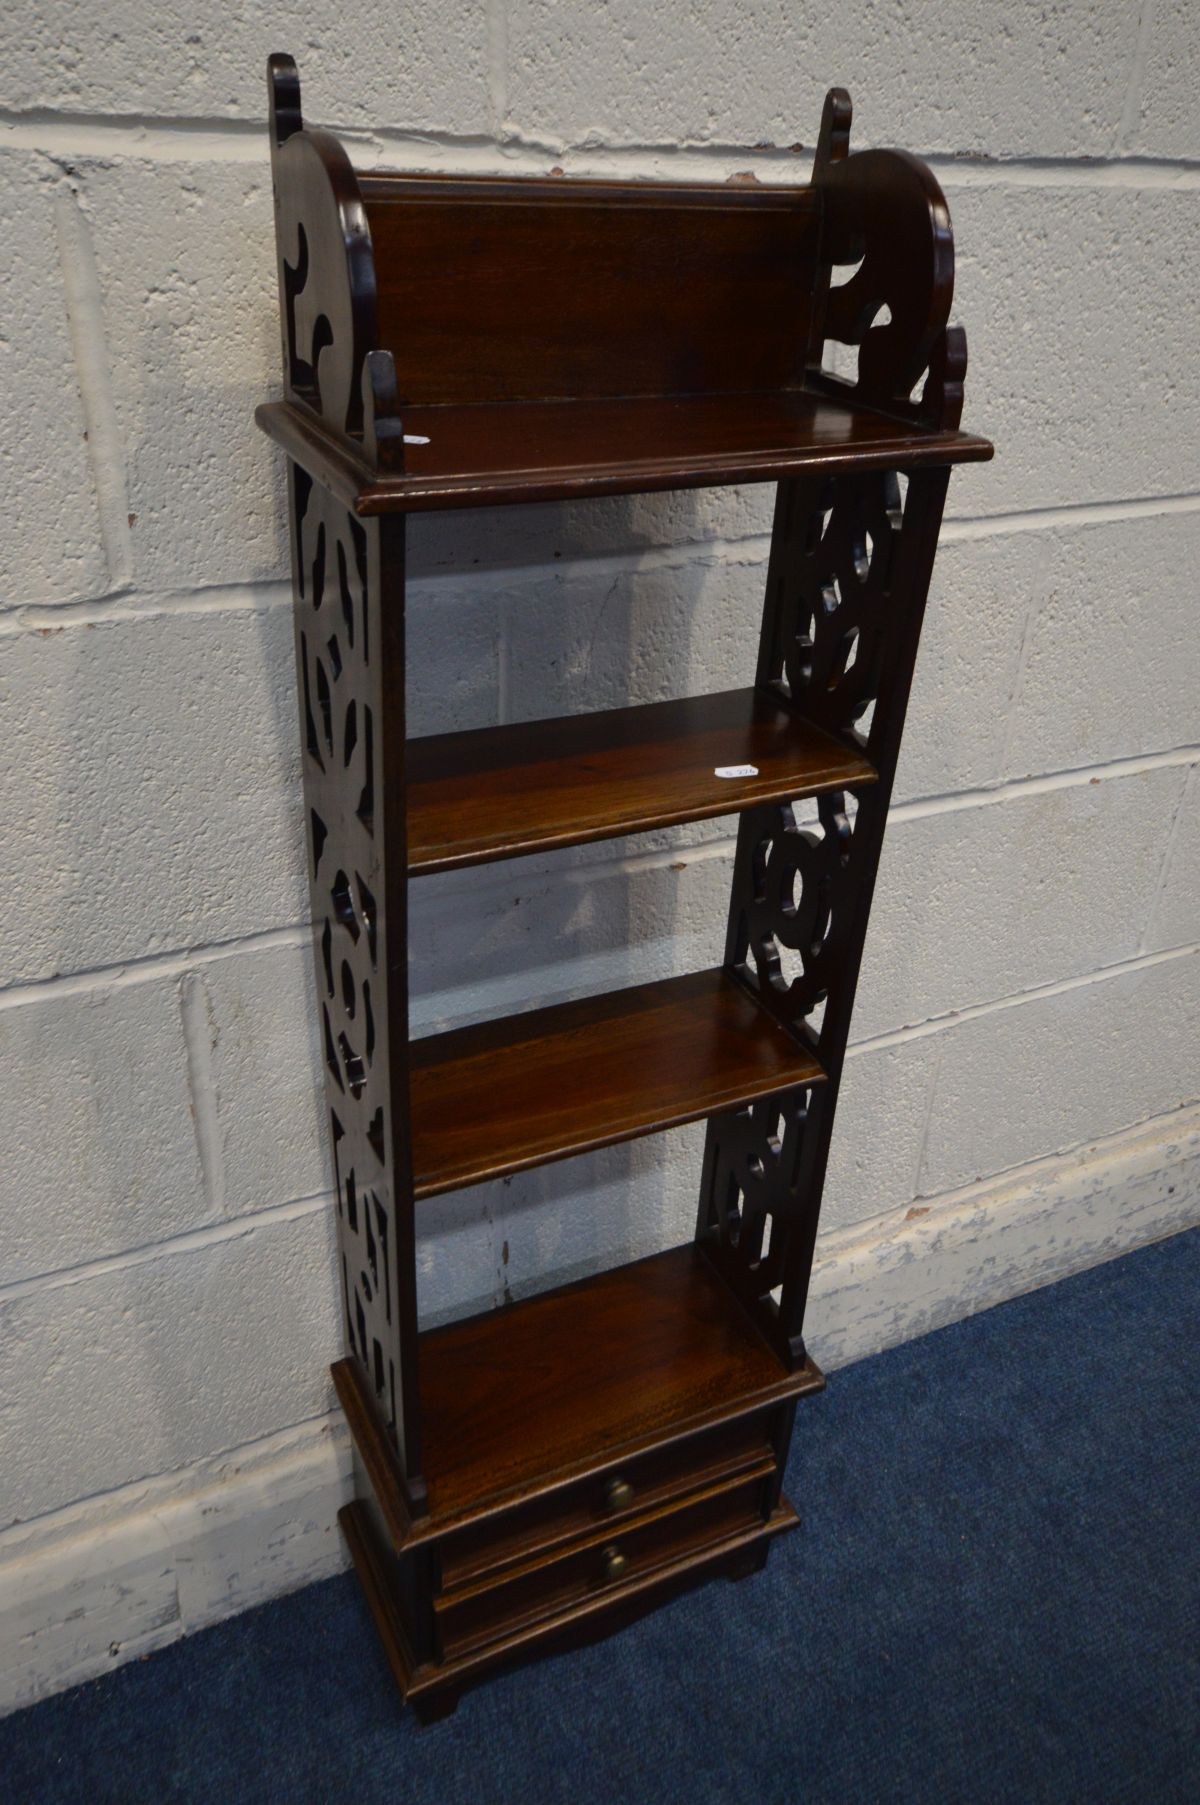 A SLIM HARDWOOD OPEN BOOKCASE with two drawers, width 35cm x depth 16cm x height 111cm